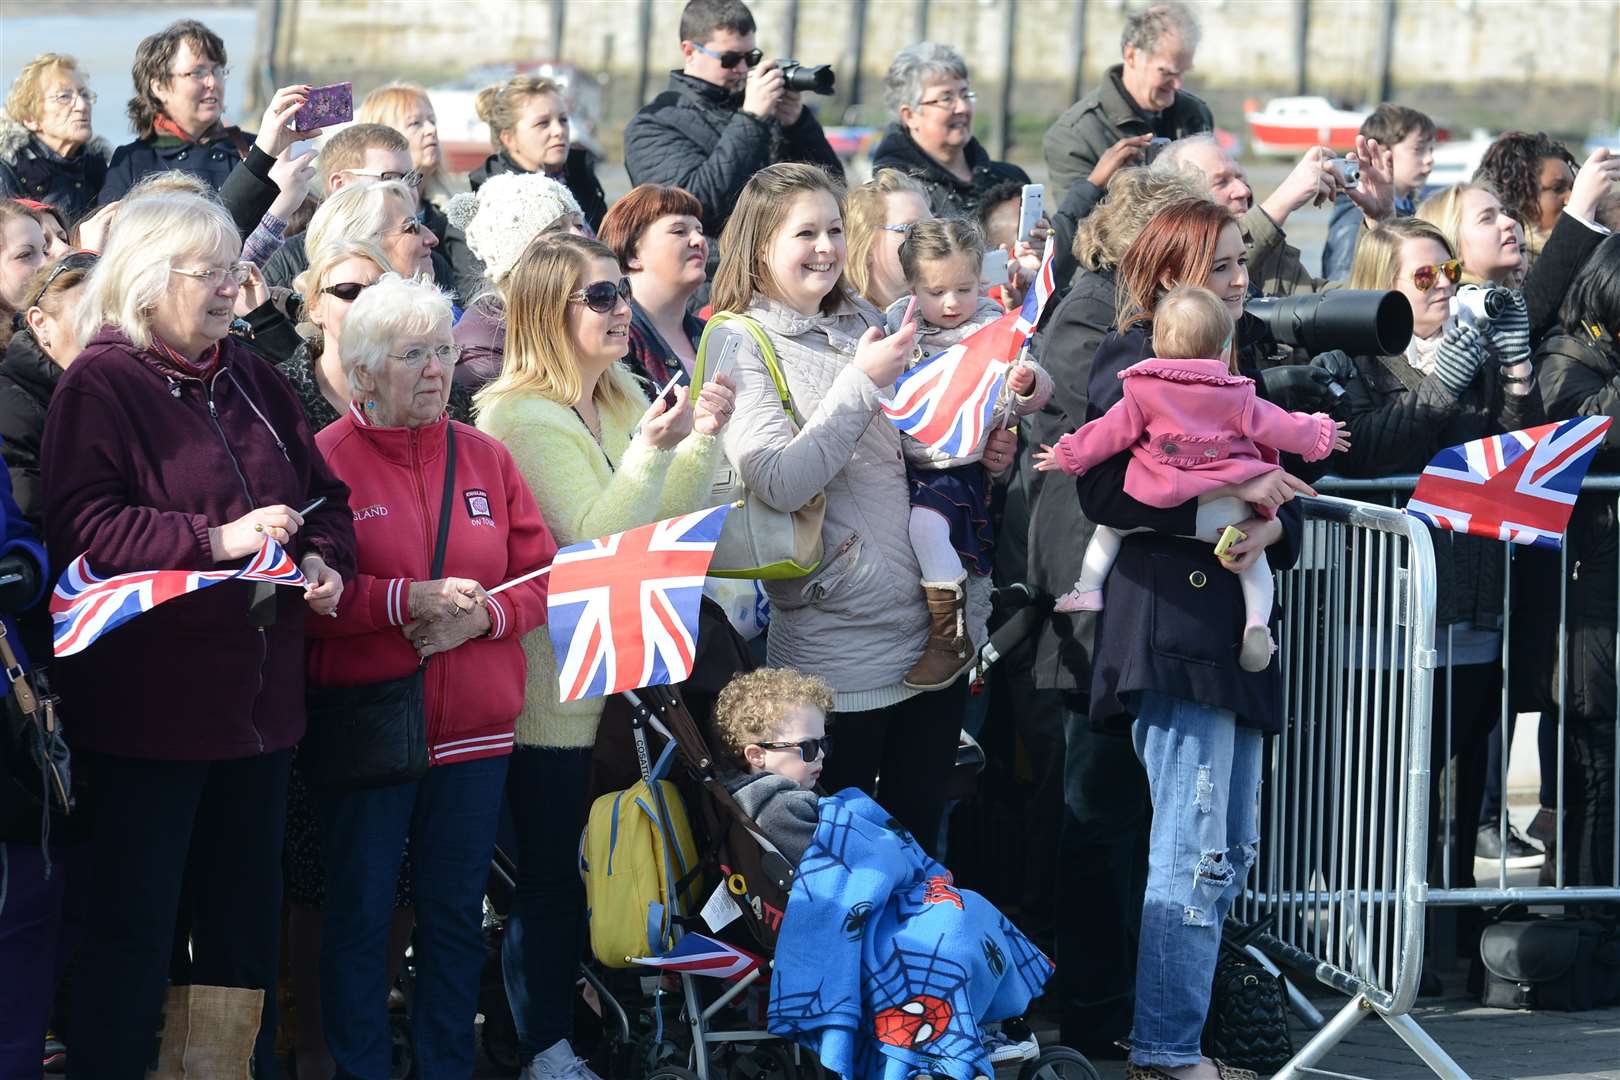 Crowds turned out for the Duchess's visit